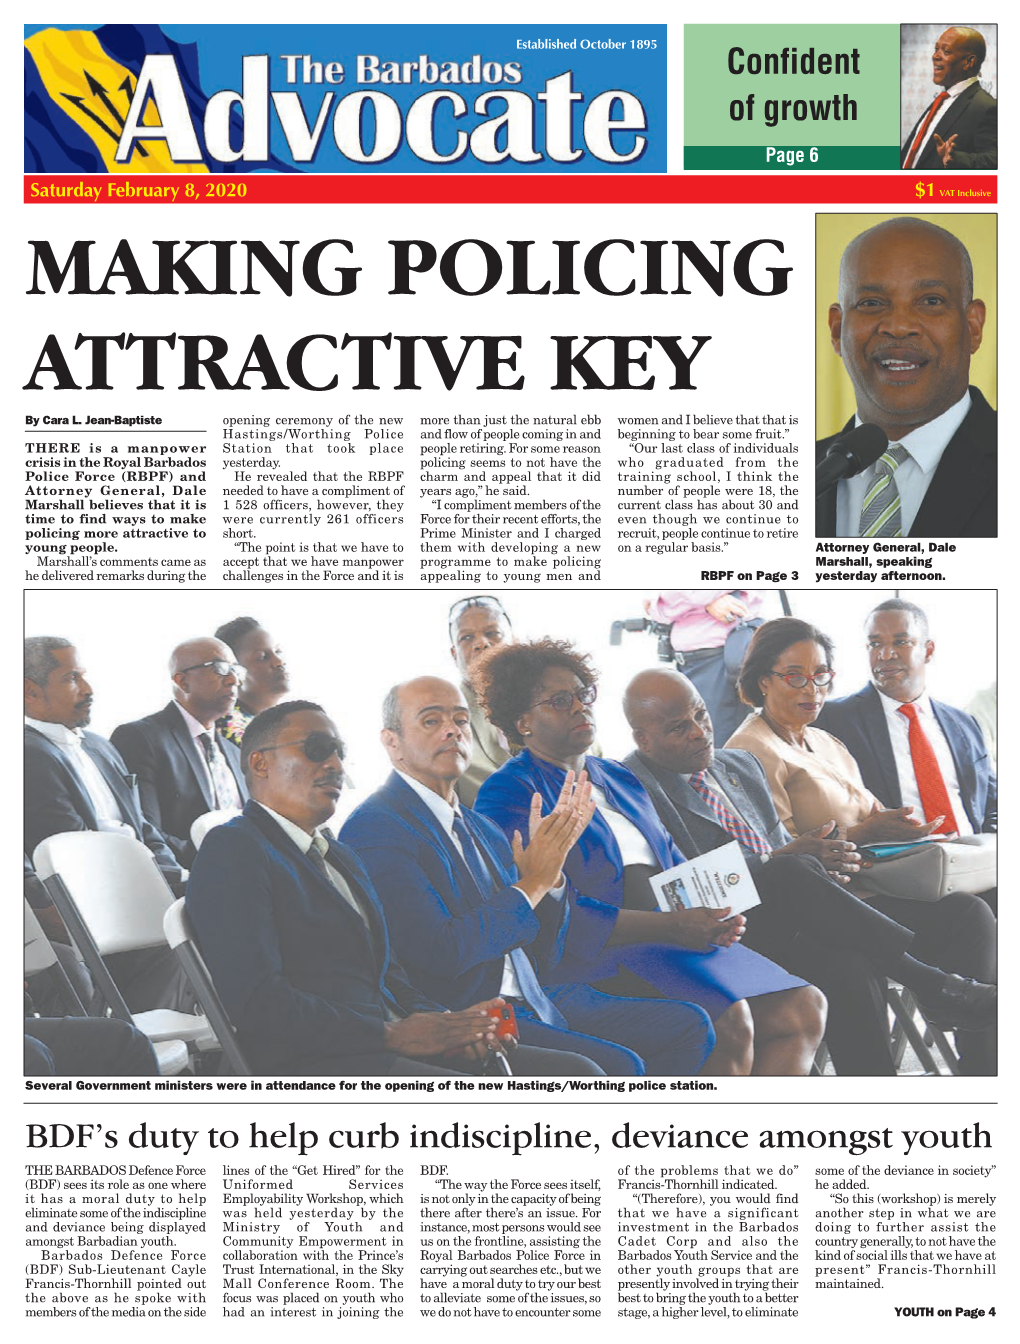 Making Policing Attractive